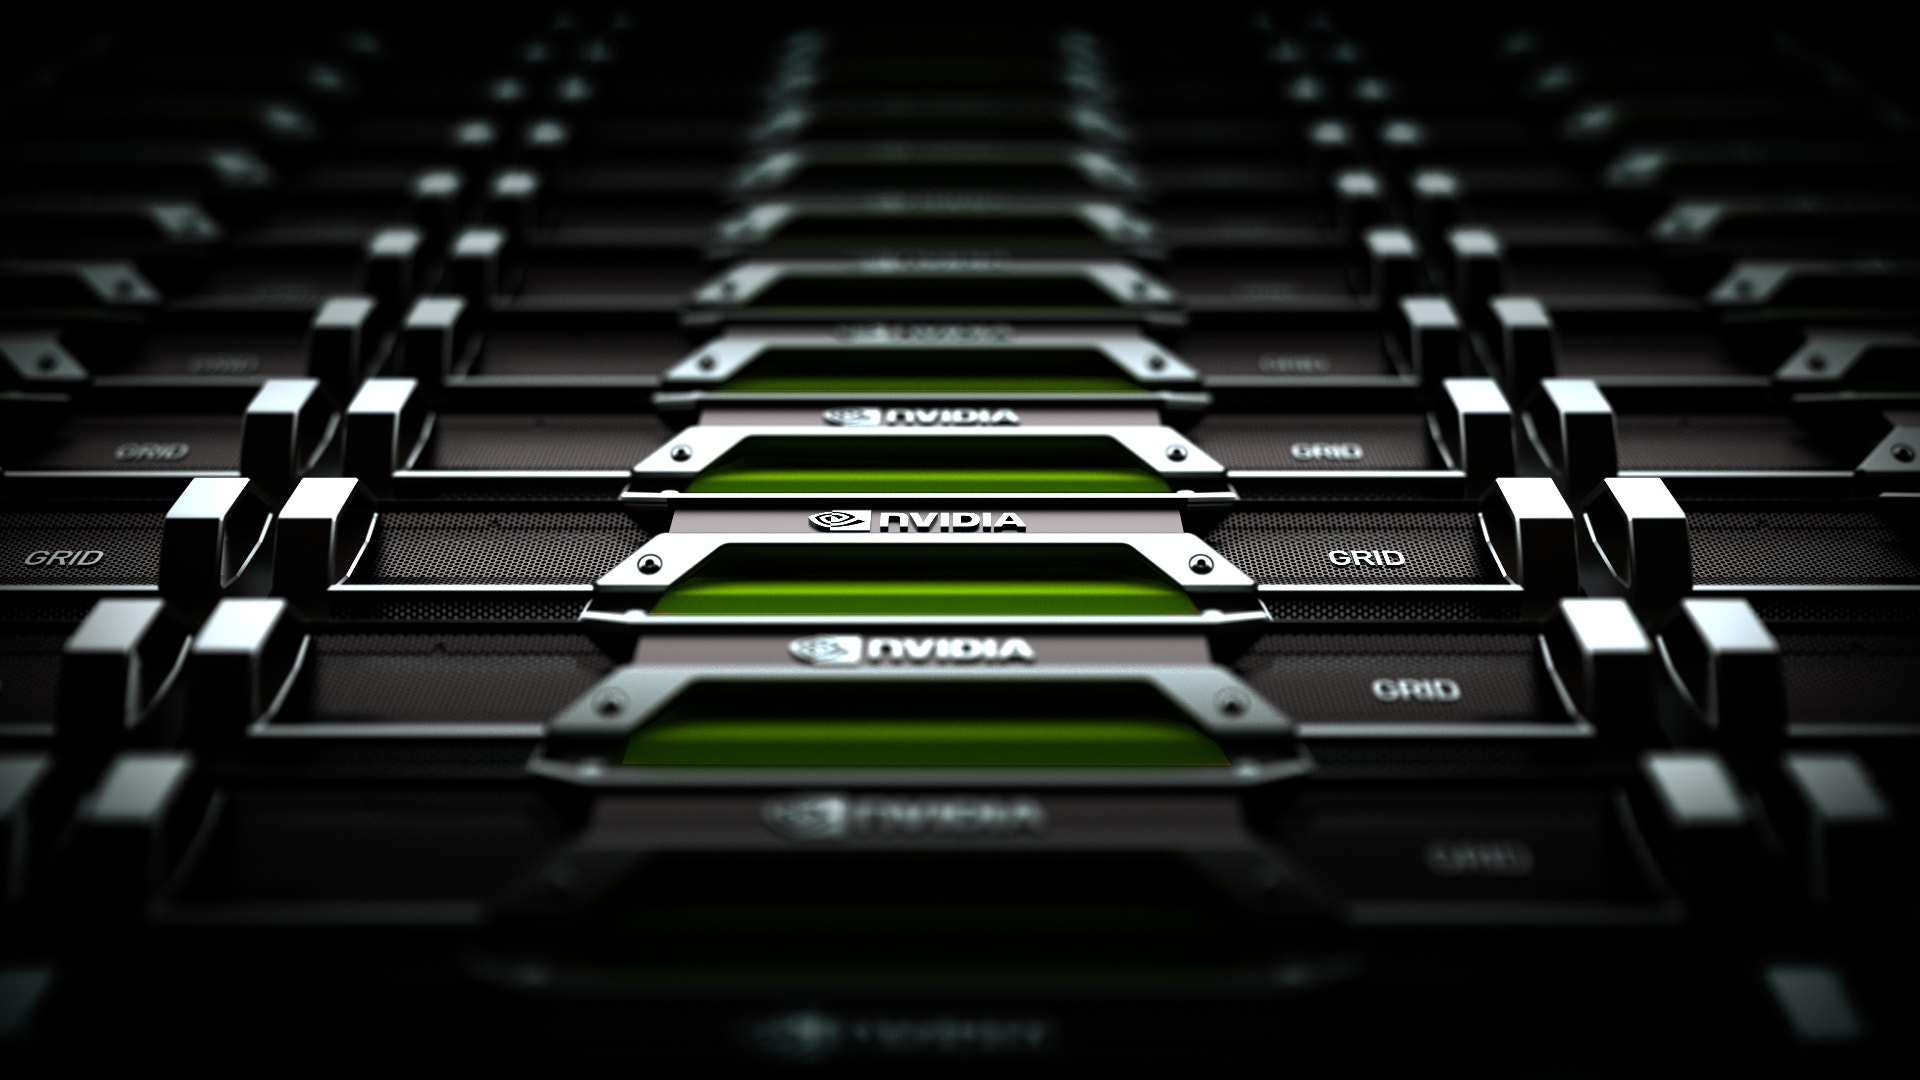 Why Nvidia Stock Is Falling Today